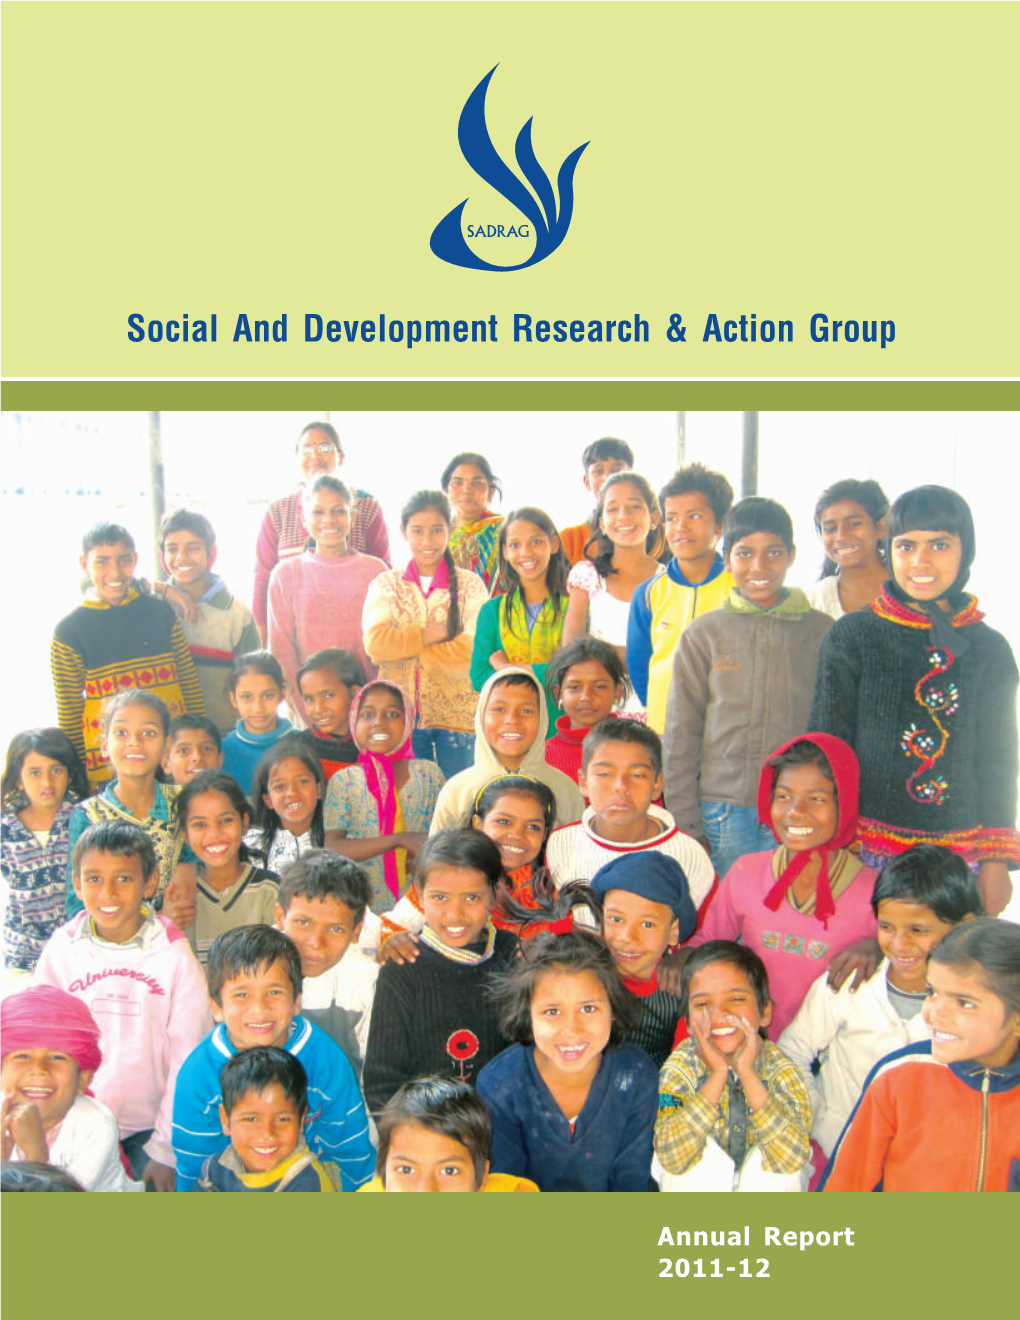 Annual Report 2011-12 Social and Development Research & Action Group